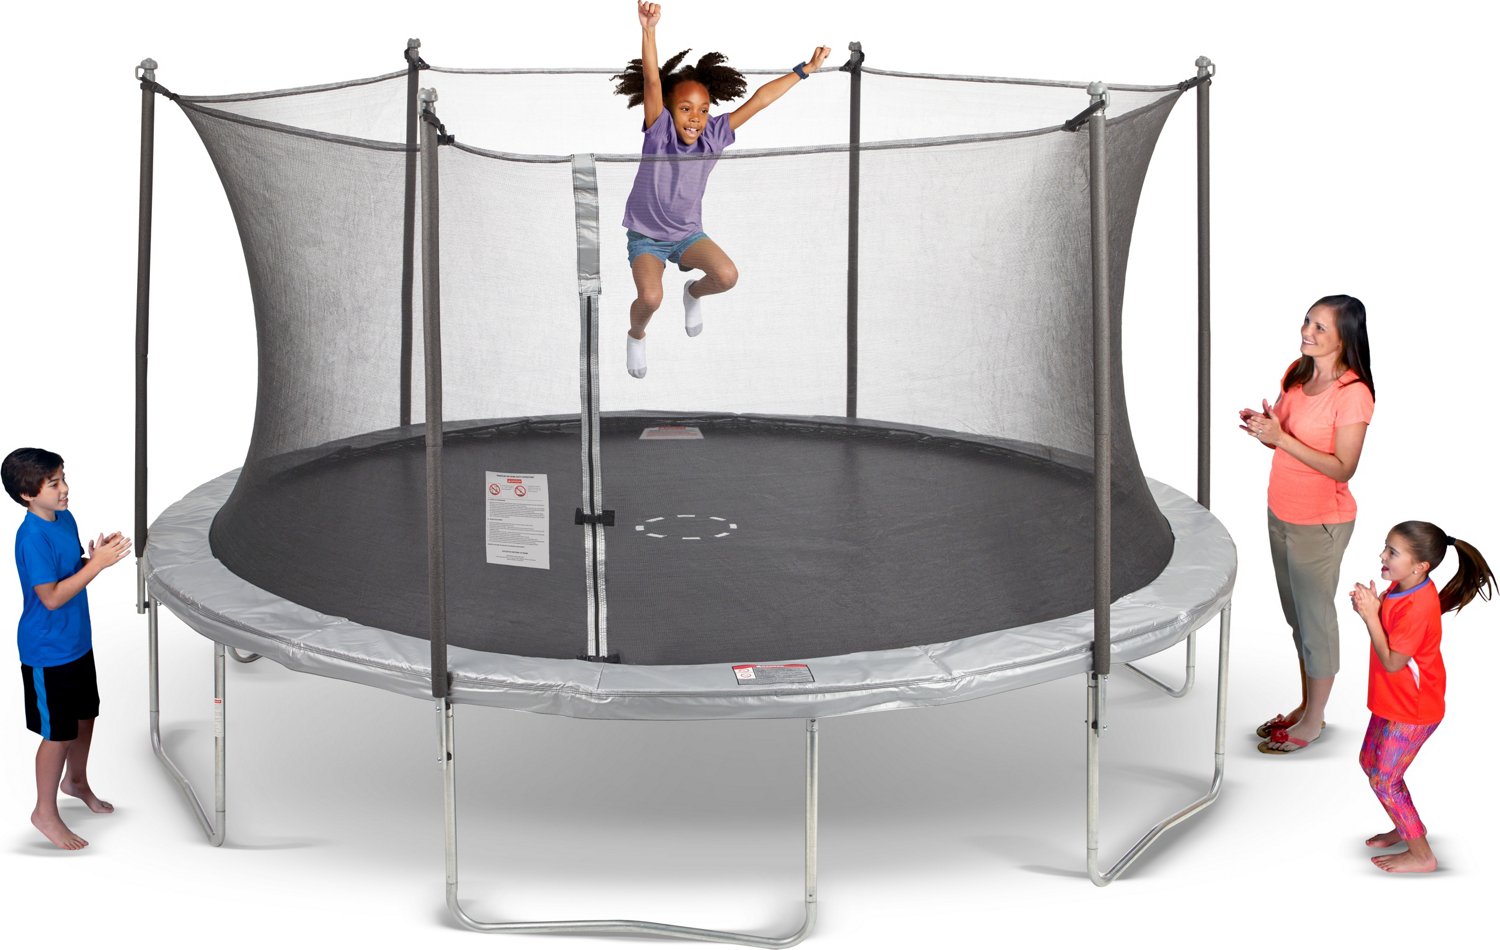 PRICE!* Sports – AGame 14 ft Round Trampoline with Enclosure just $149.99 + FREE Shipping!! 15 ft w/ Basketball just $199.99 + FREE – Bargain Boutique Deals